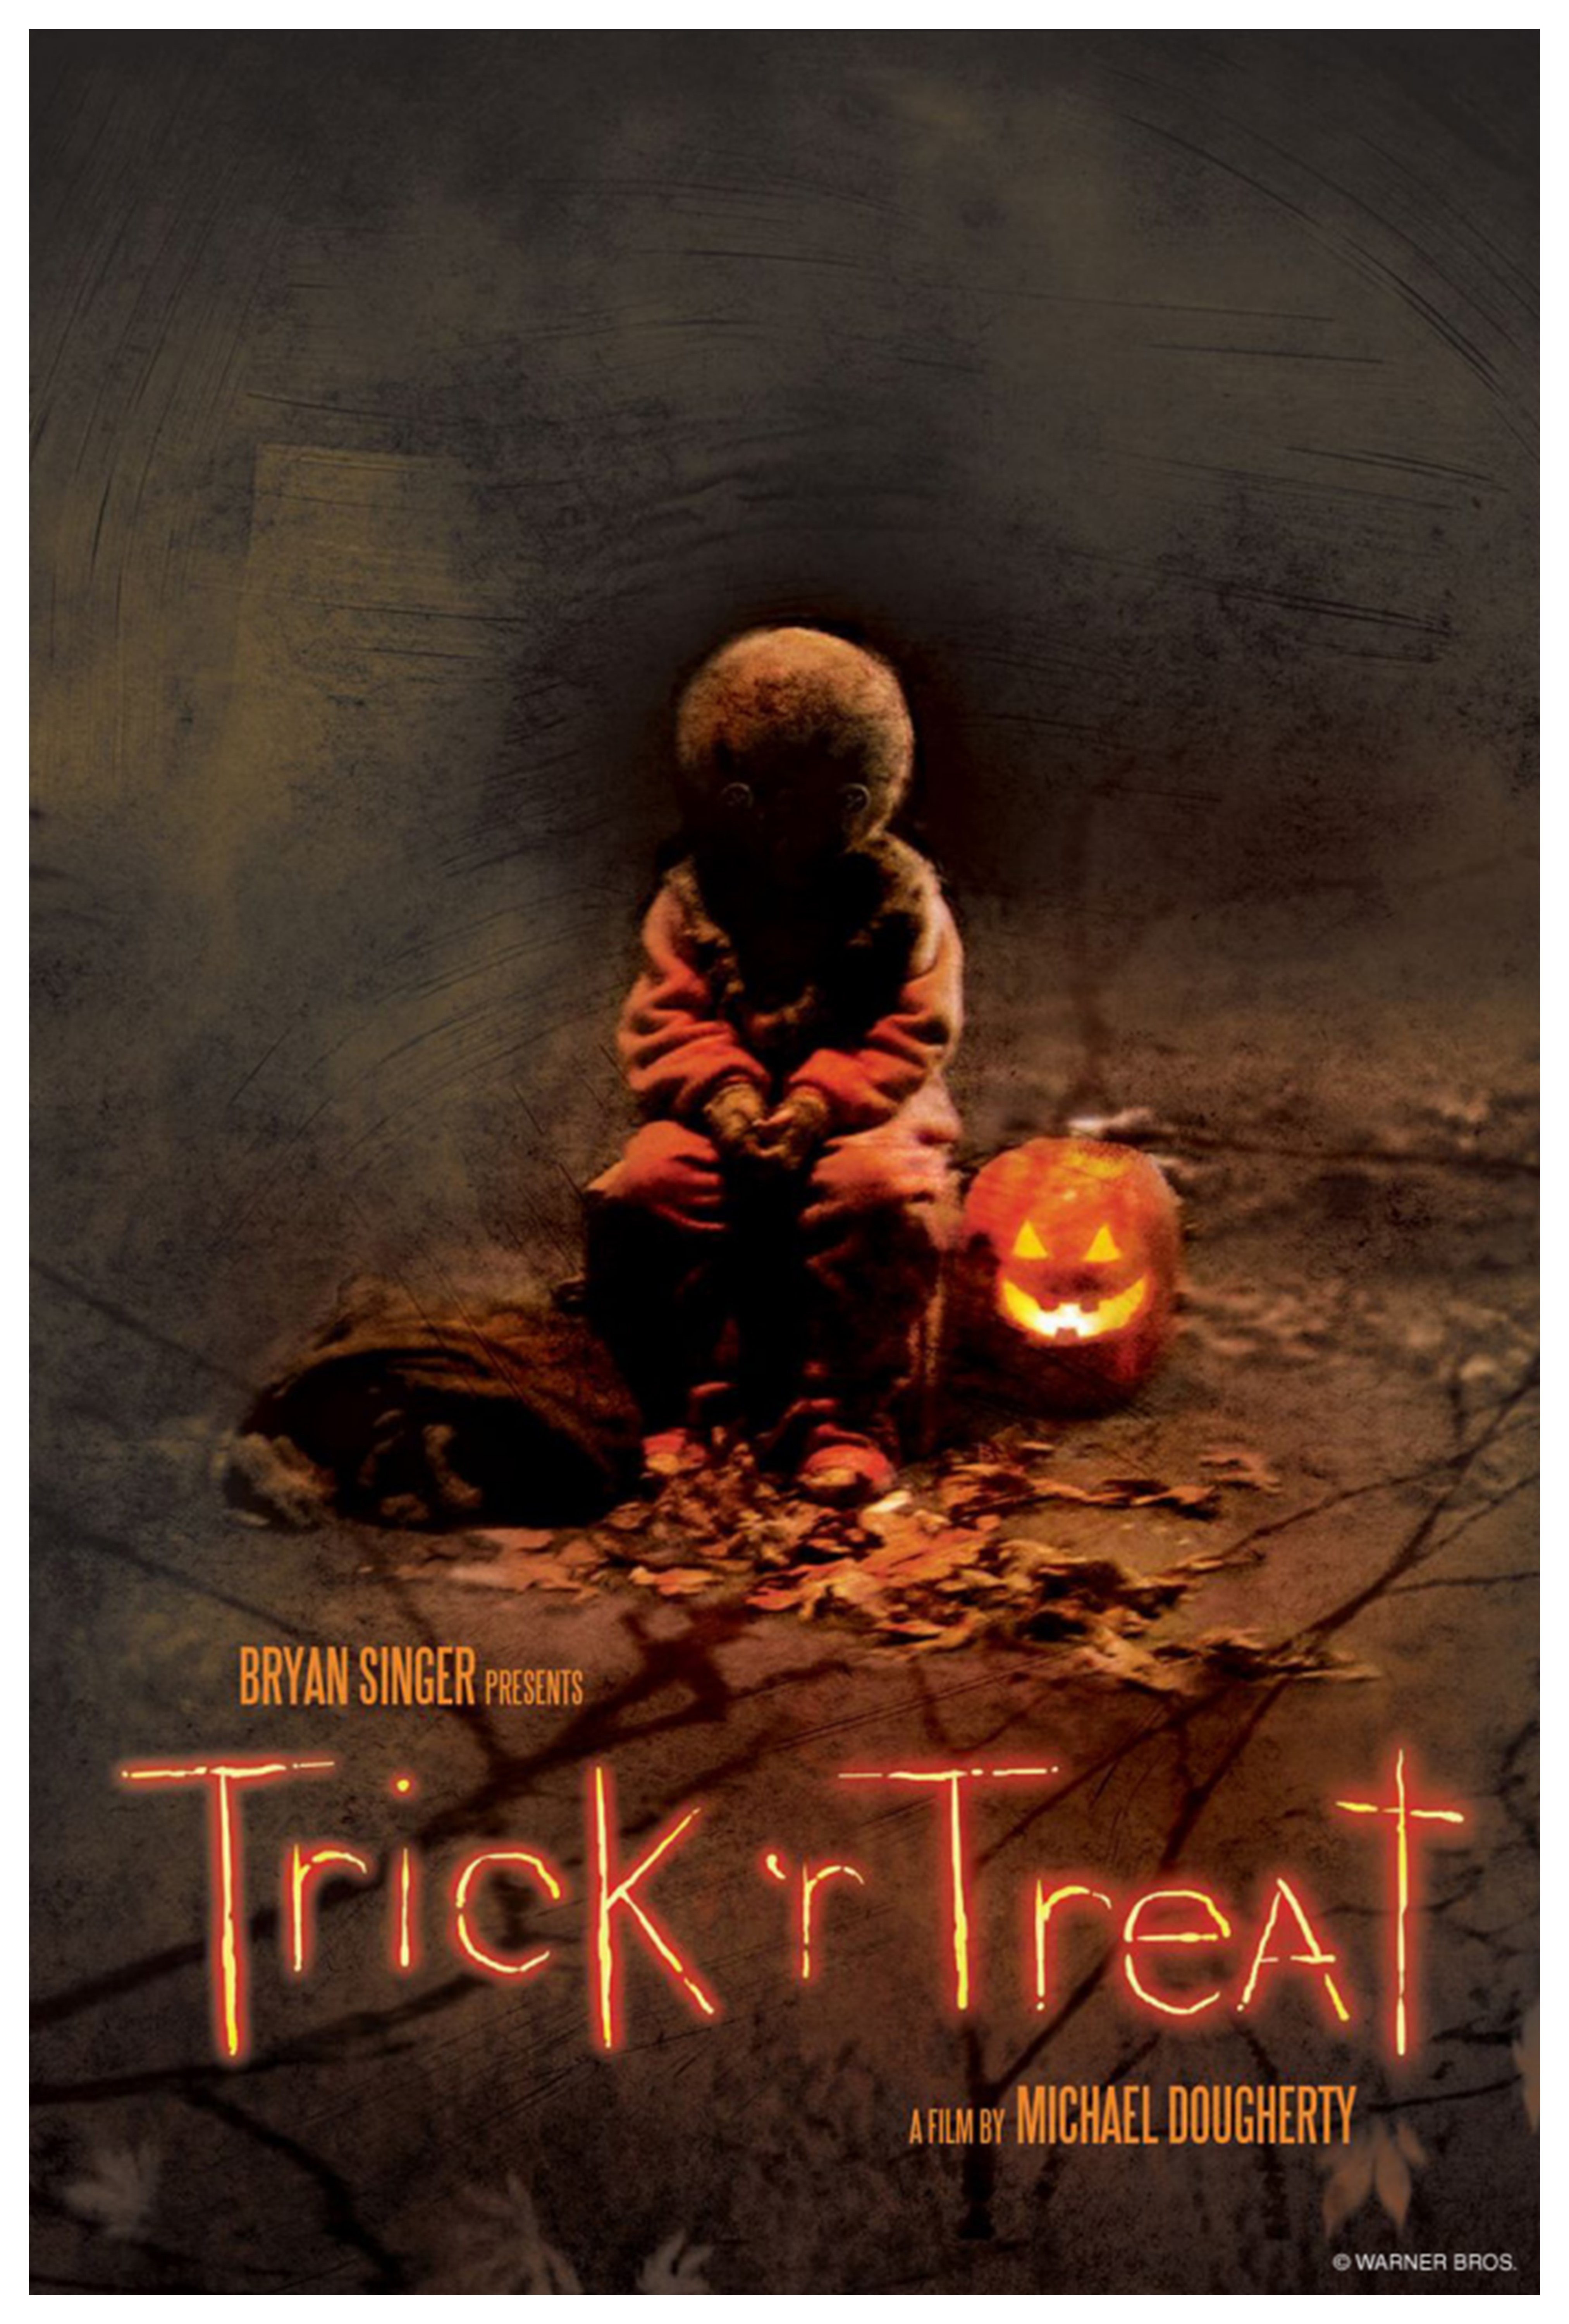 Film poster for Trick 'r Treat featuring orange letters on a dark background with the image of a faceless figure seated next to a glowing jack 'o lantern.